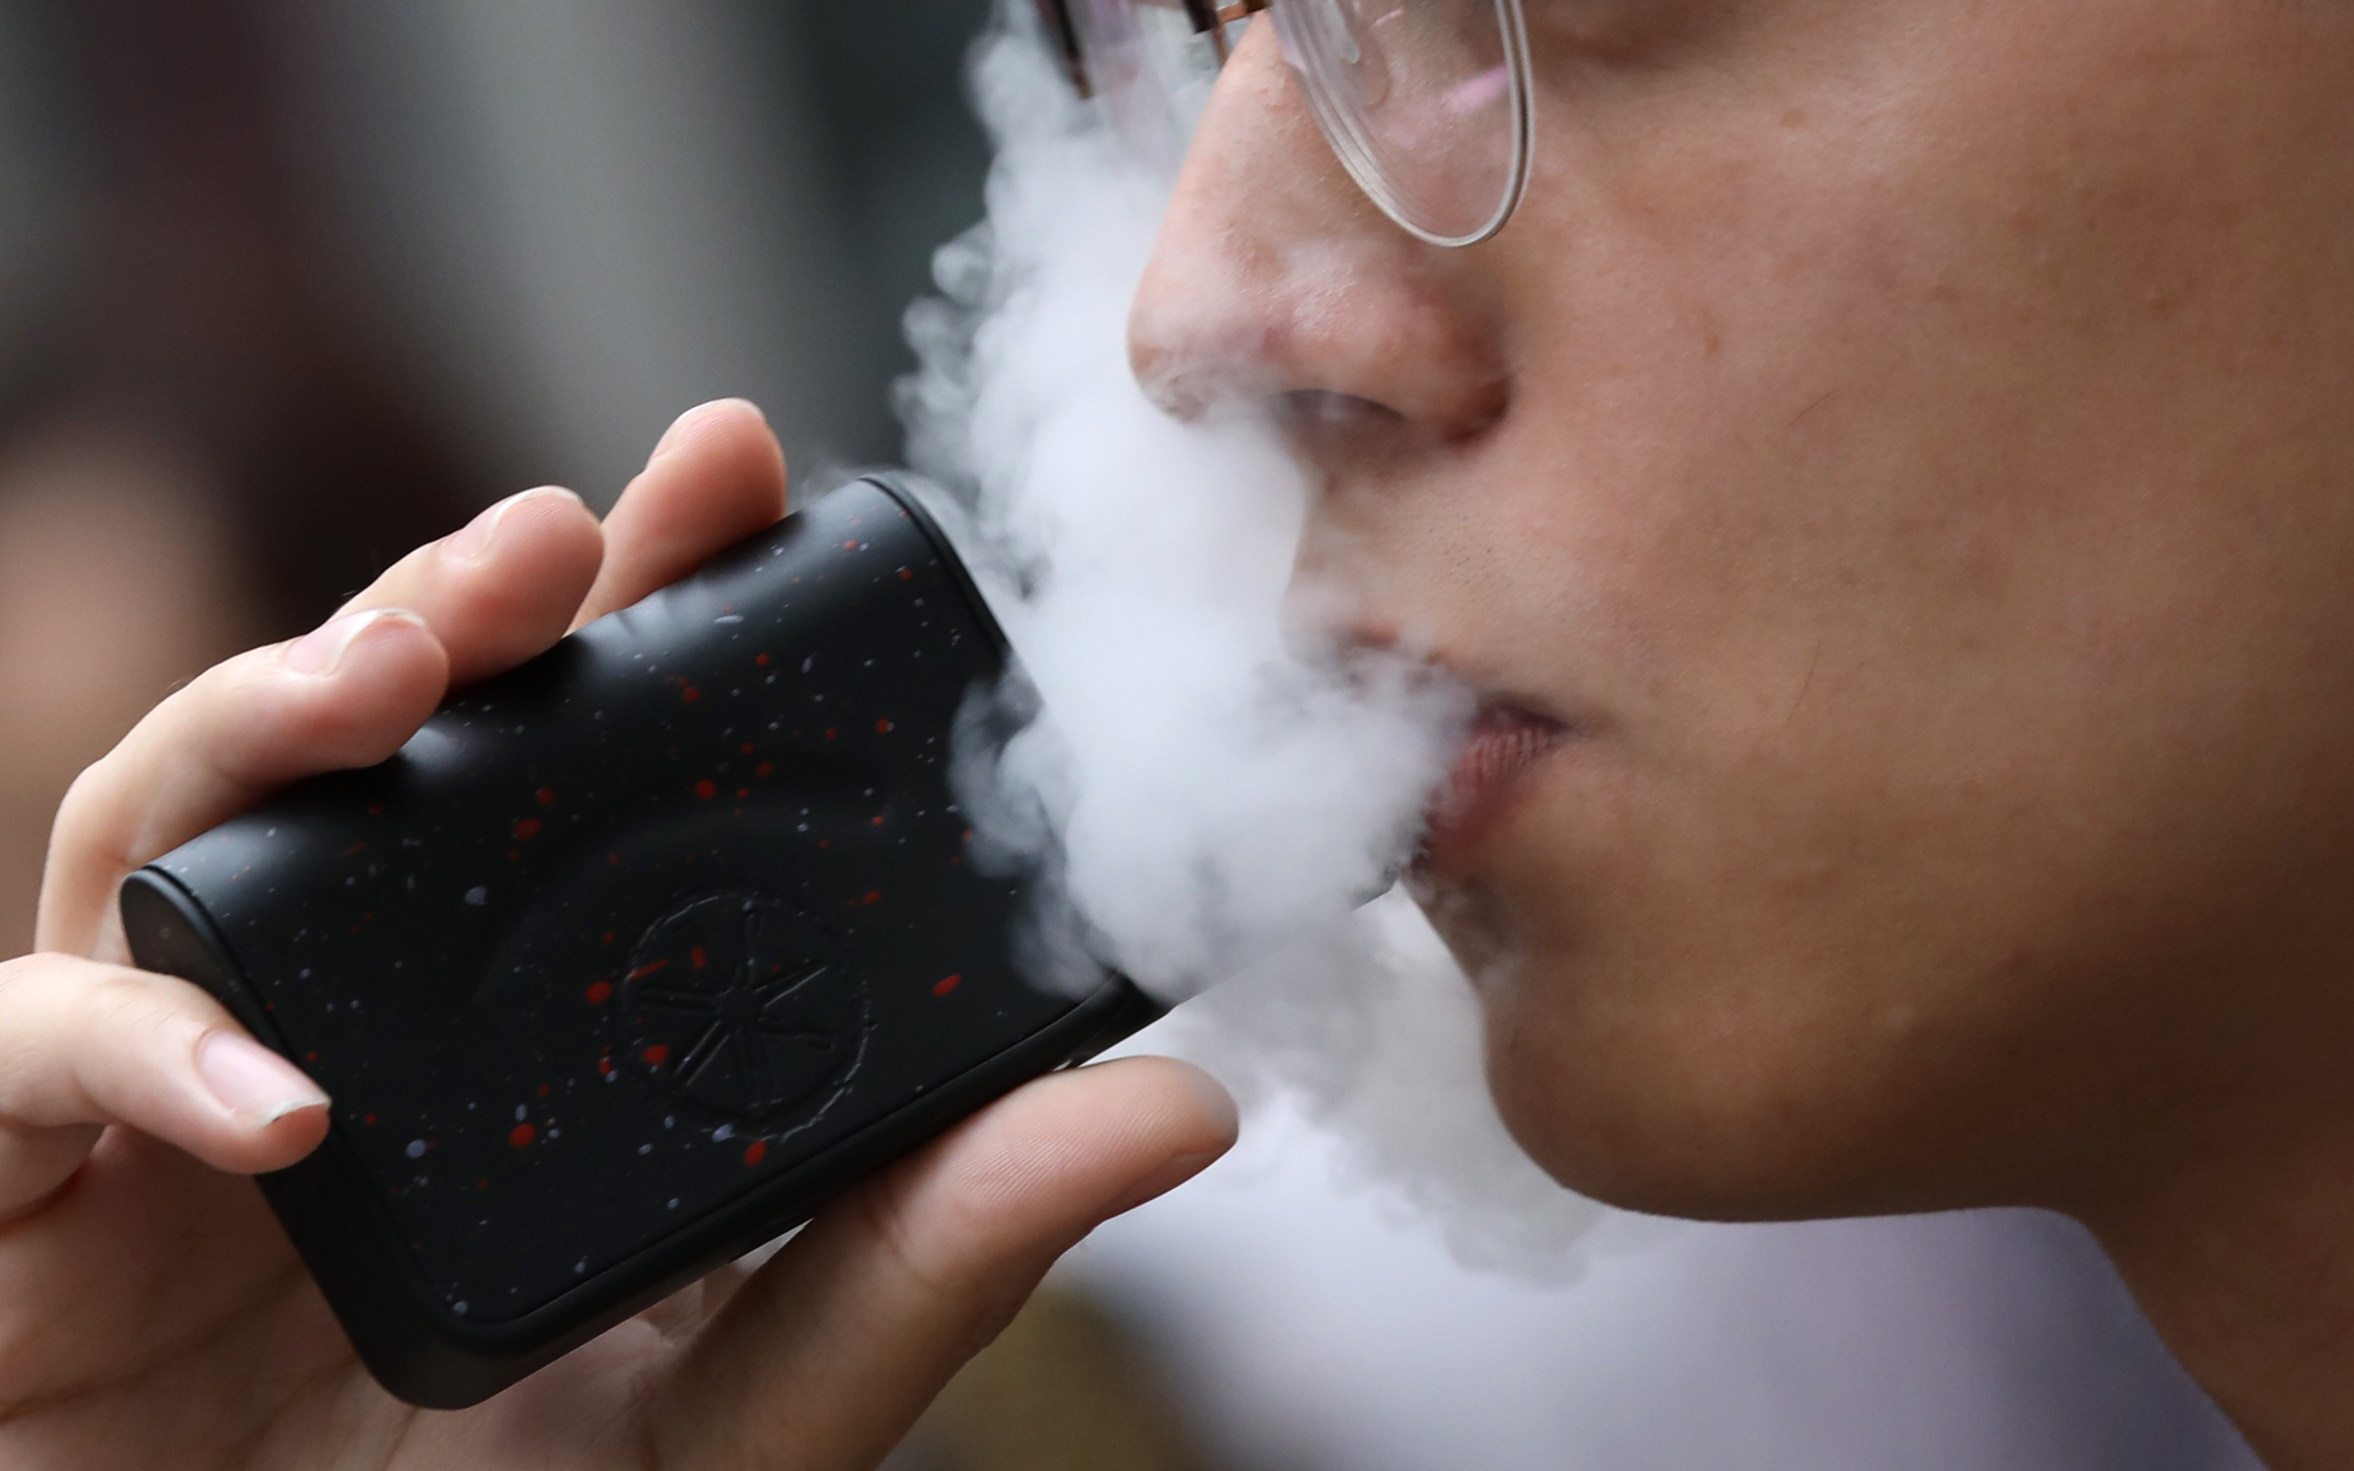 Hong Kong police make first arrests under law banning sale of e-cigarettes,  2 suspects remain in custody | South China Morning Post